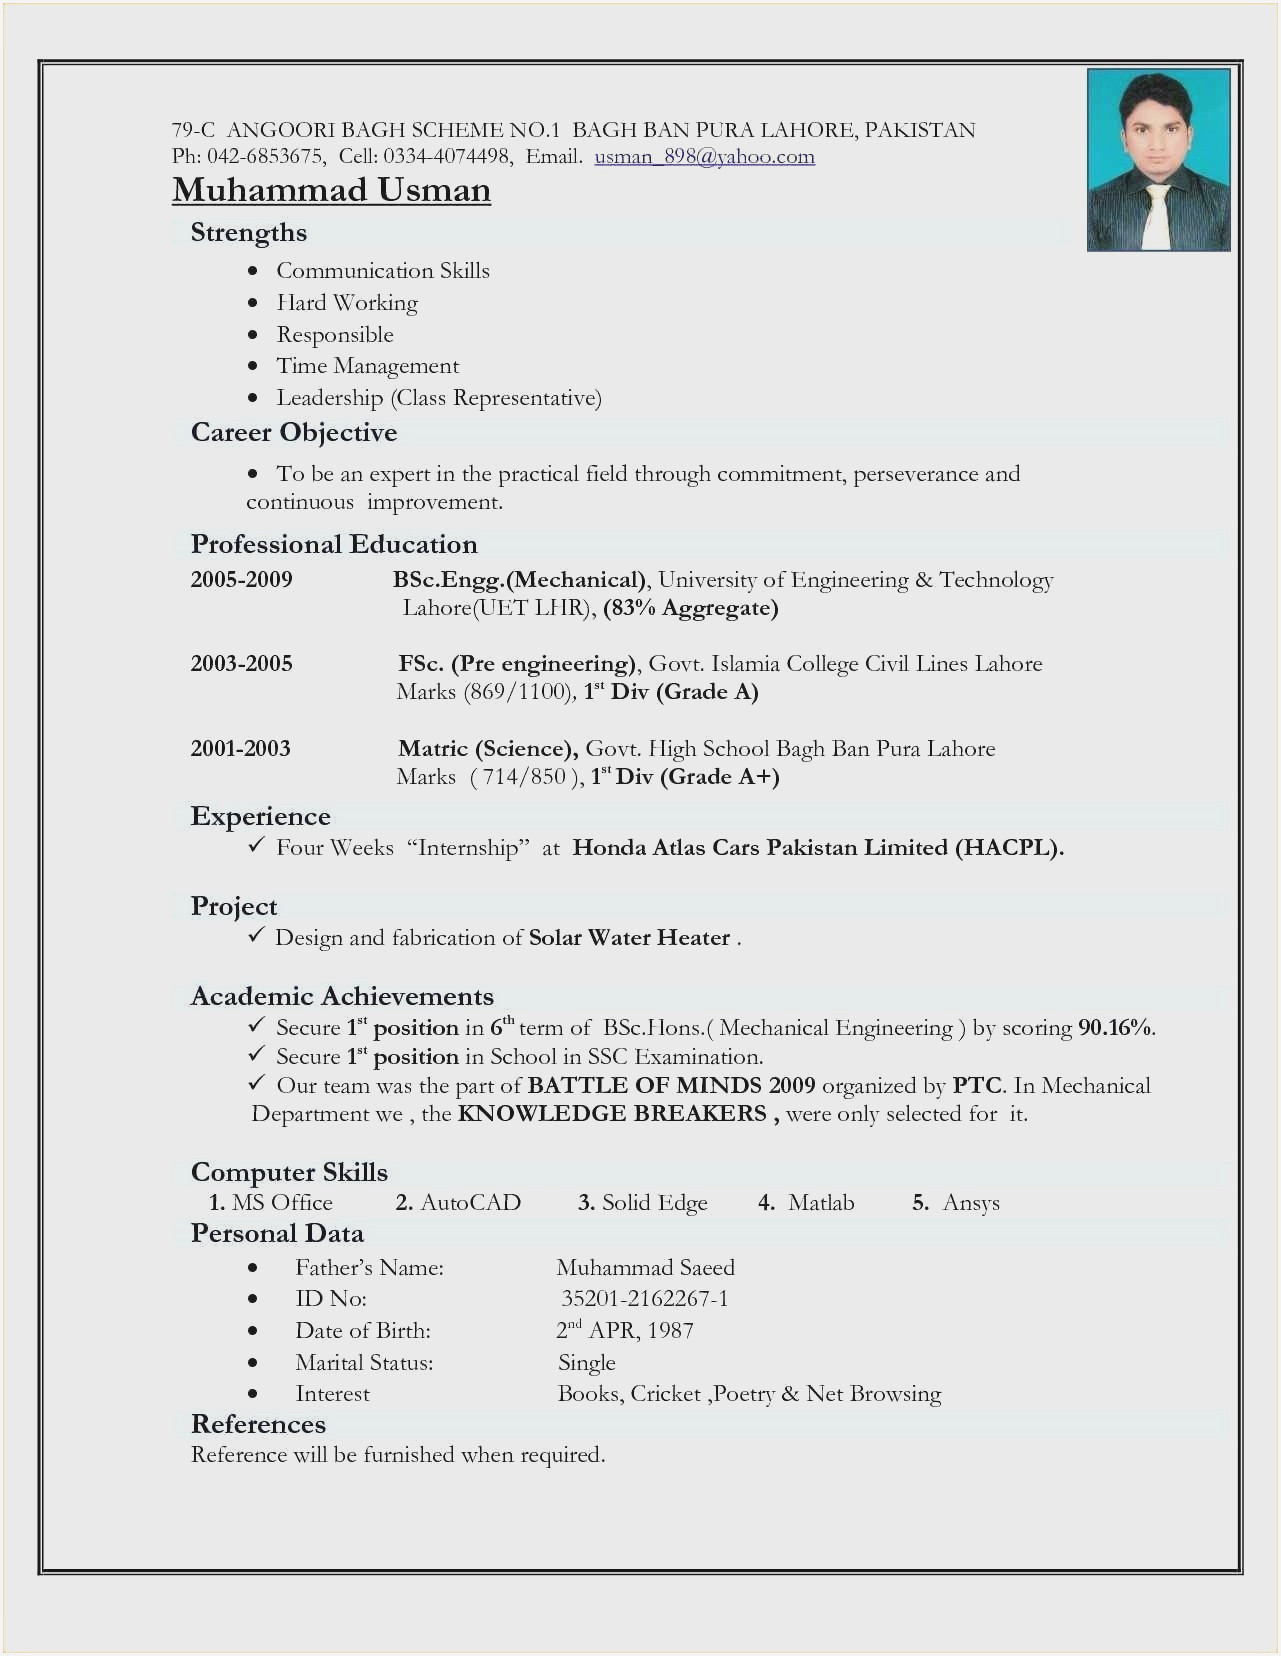 Sample Resume for Computer Science Fresh Graduate Pdf Resume format for Freshers Mba Pdf